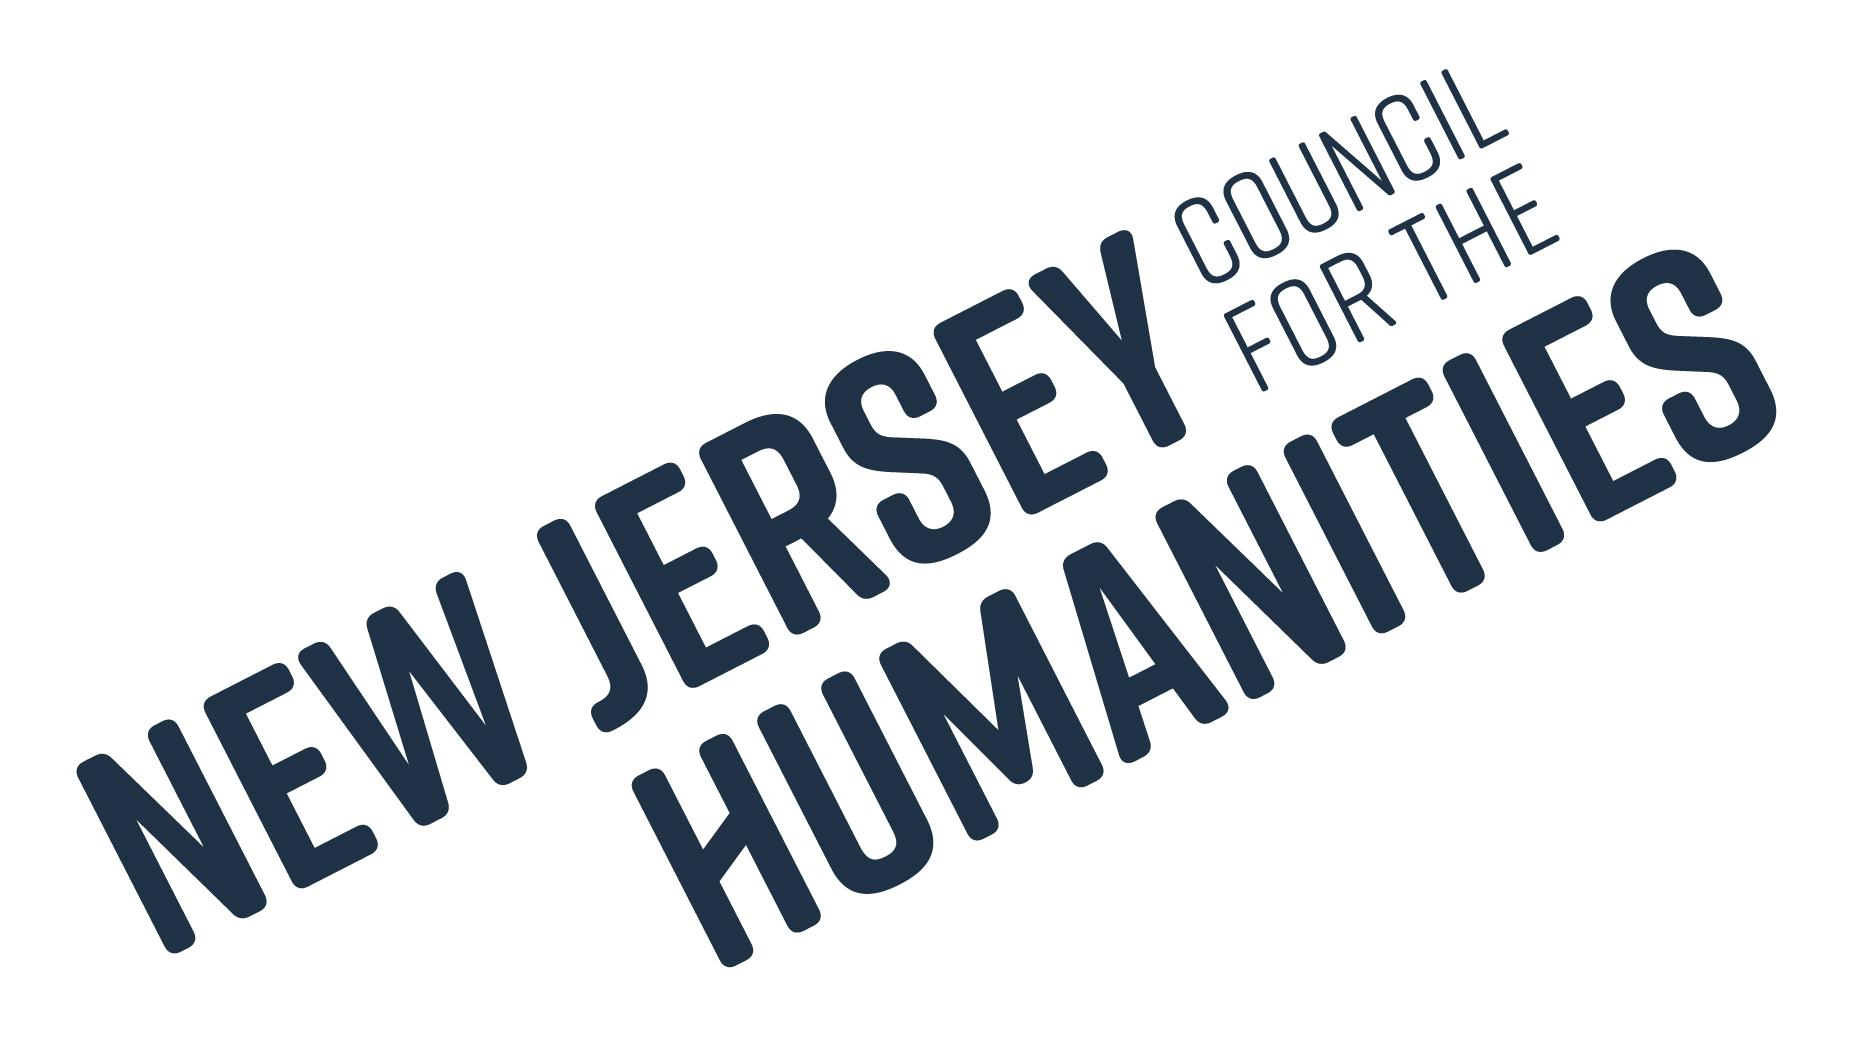 NJ Council of the Humanities